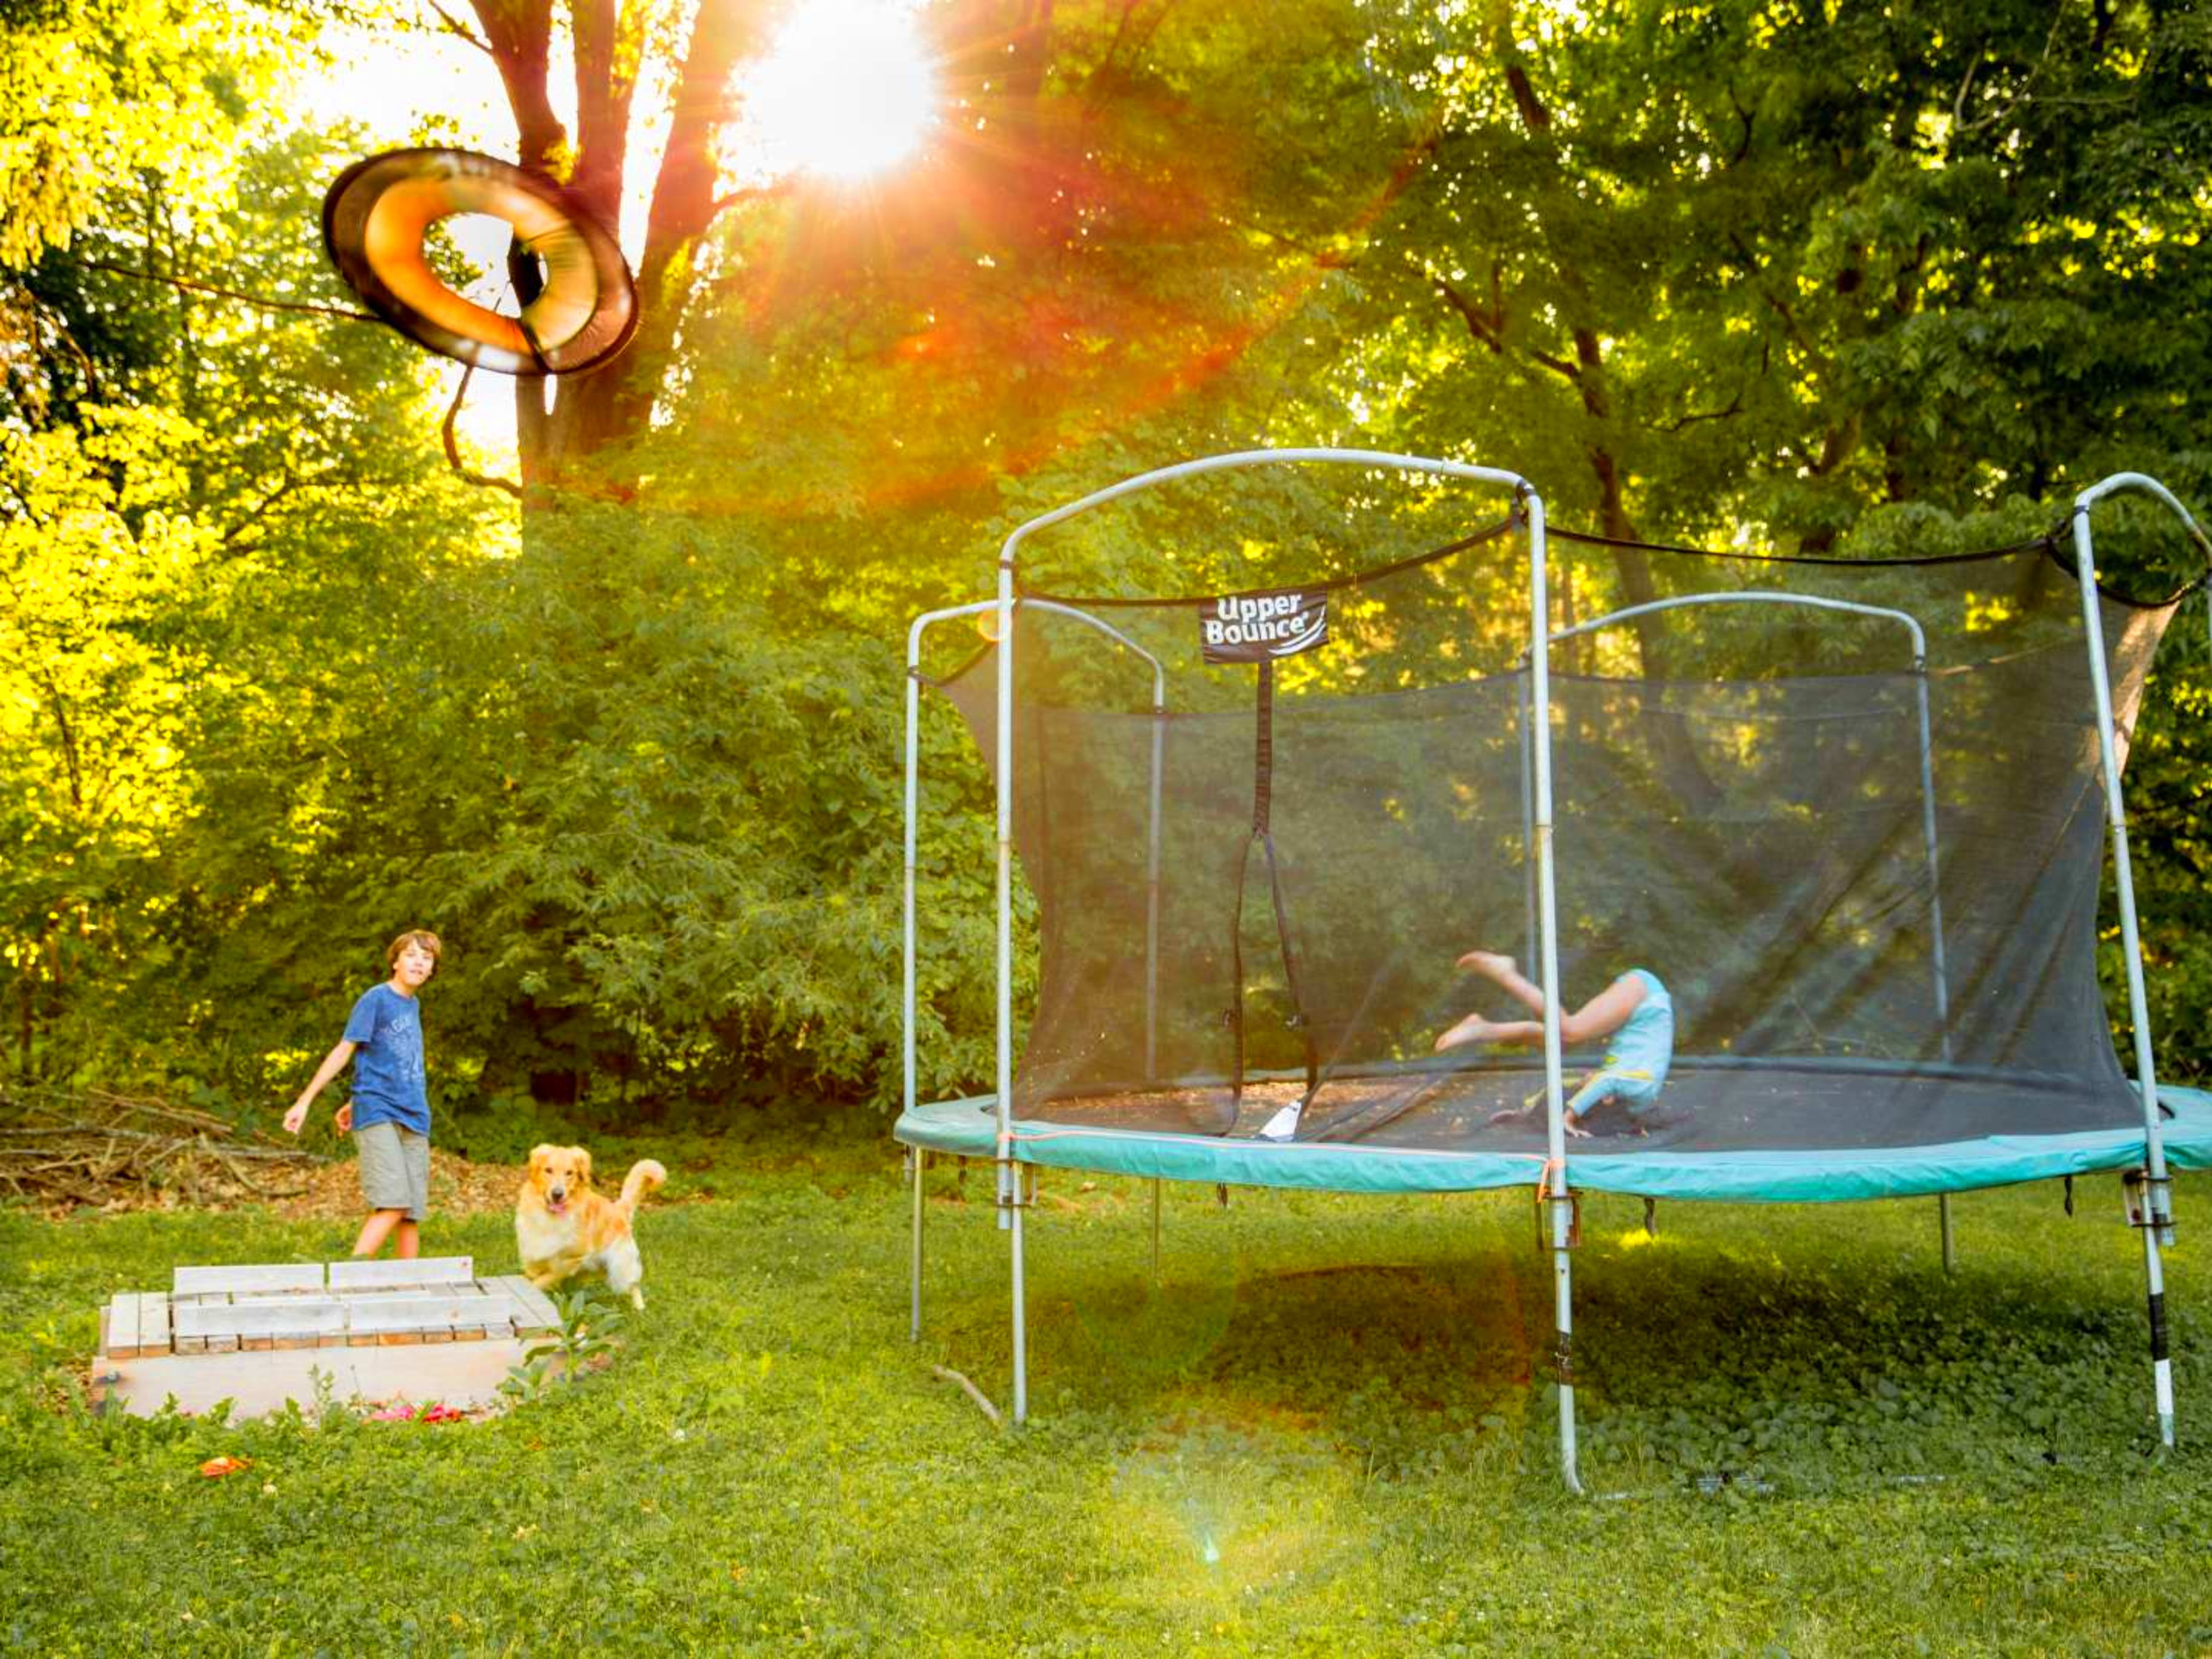 Outdoor Recreational Trampoline with Ladder for Children and Adults for Backyard Lyromix 12Ft Trampoline Kids Trampolines with Enclosure Net 